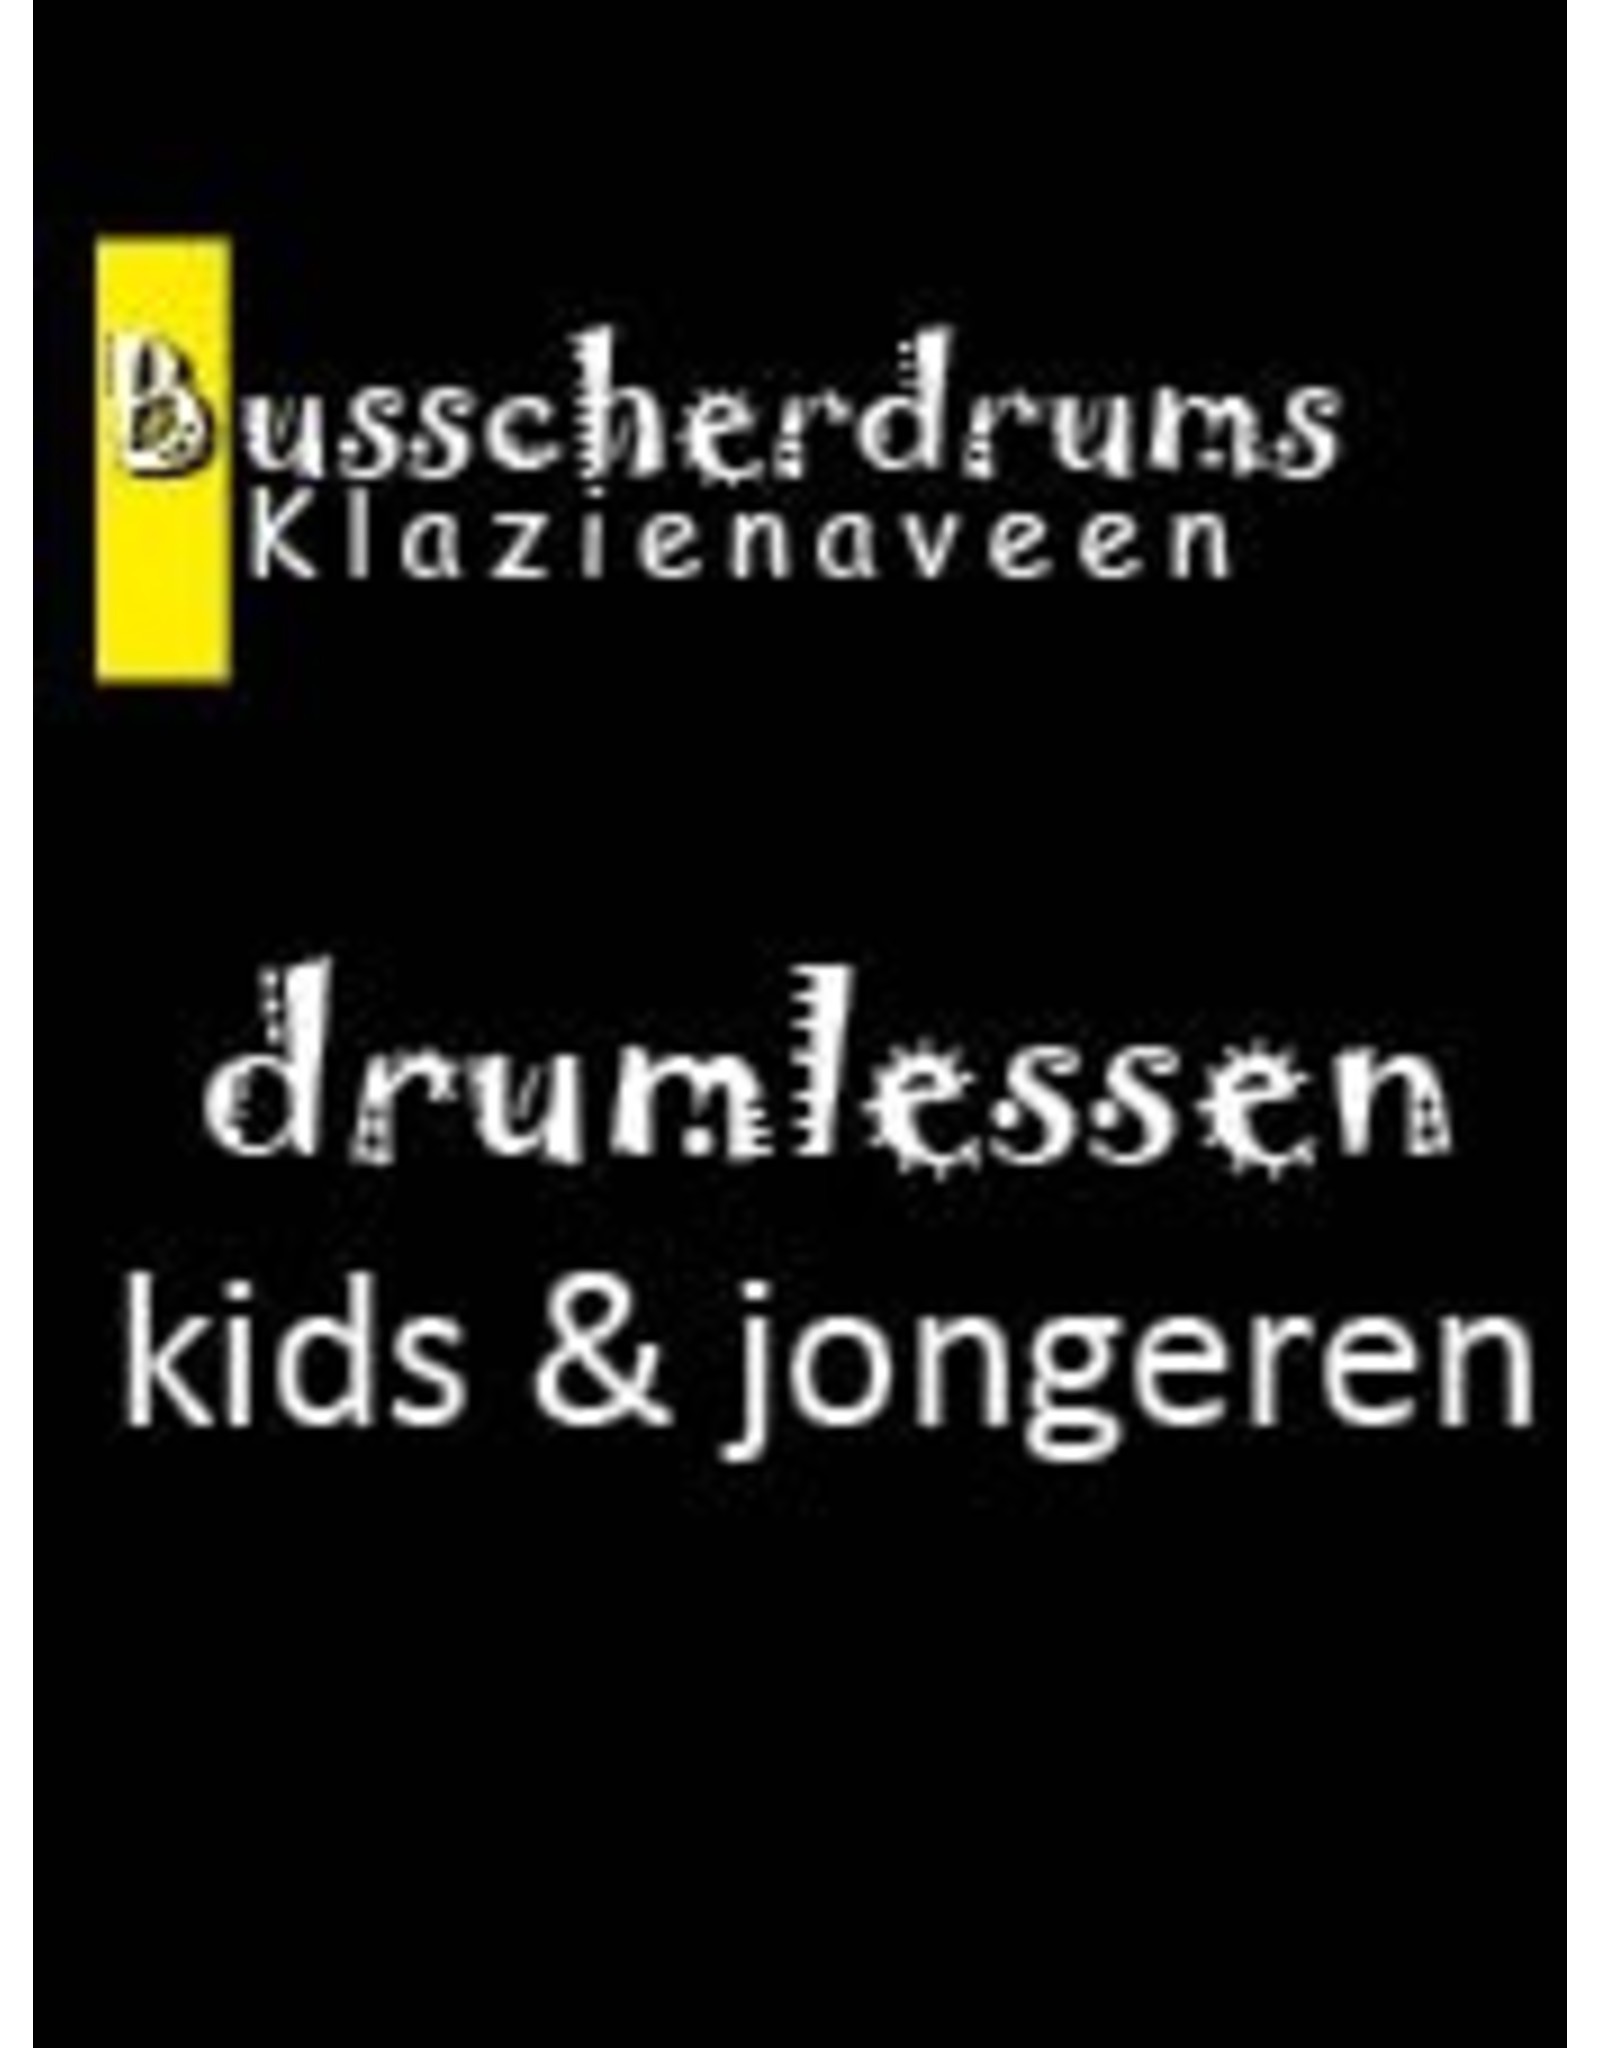 Busscherdrums Drum Lessons card 19 x 40 minutes 1 x per 14 days 607 young people